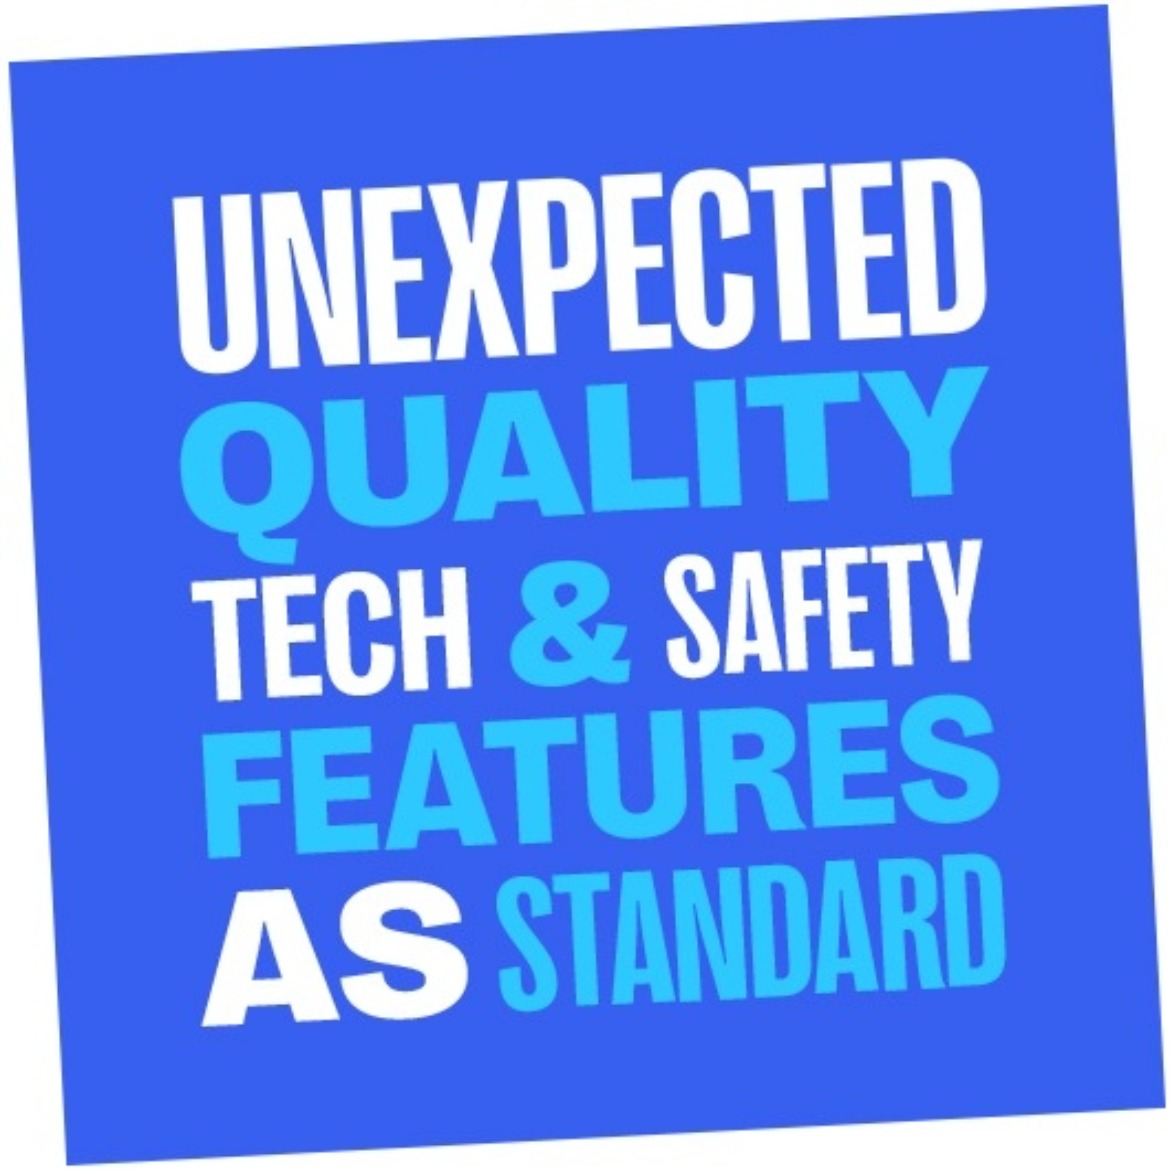 Technology and Safety features as standard